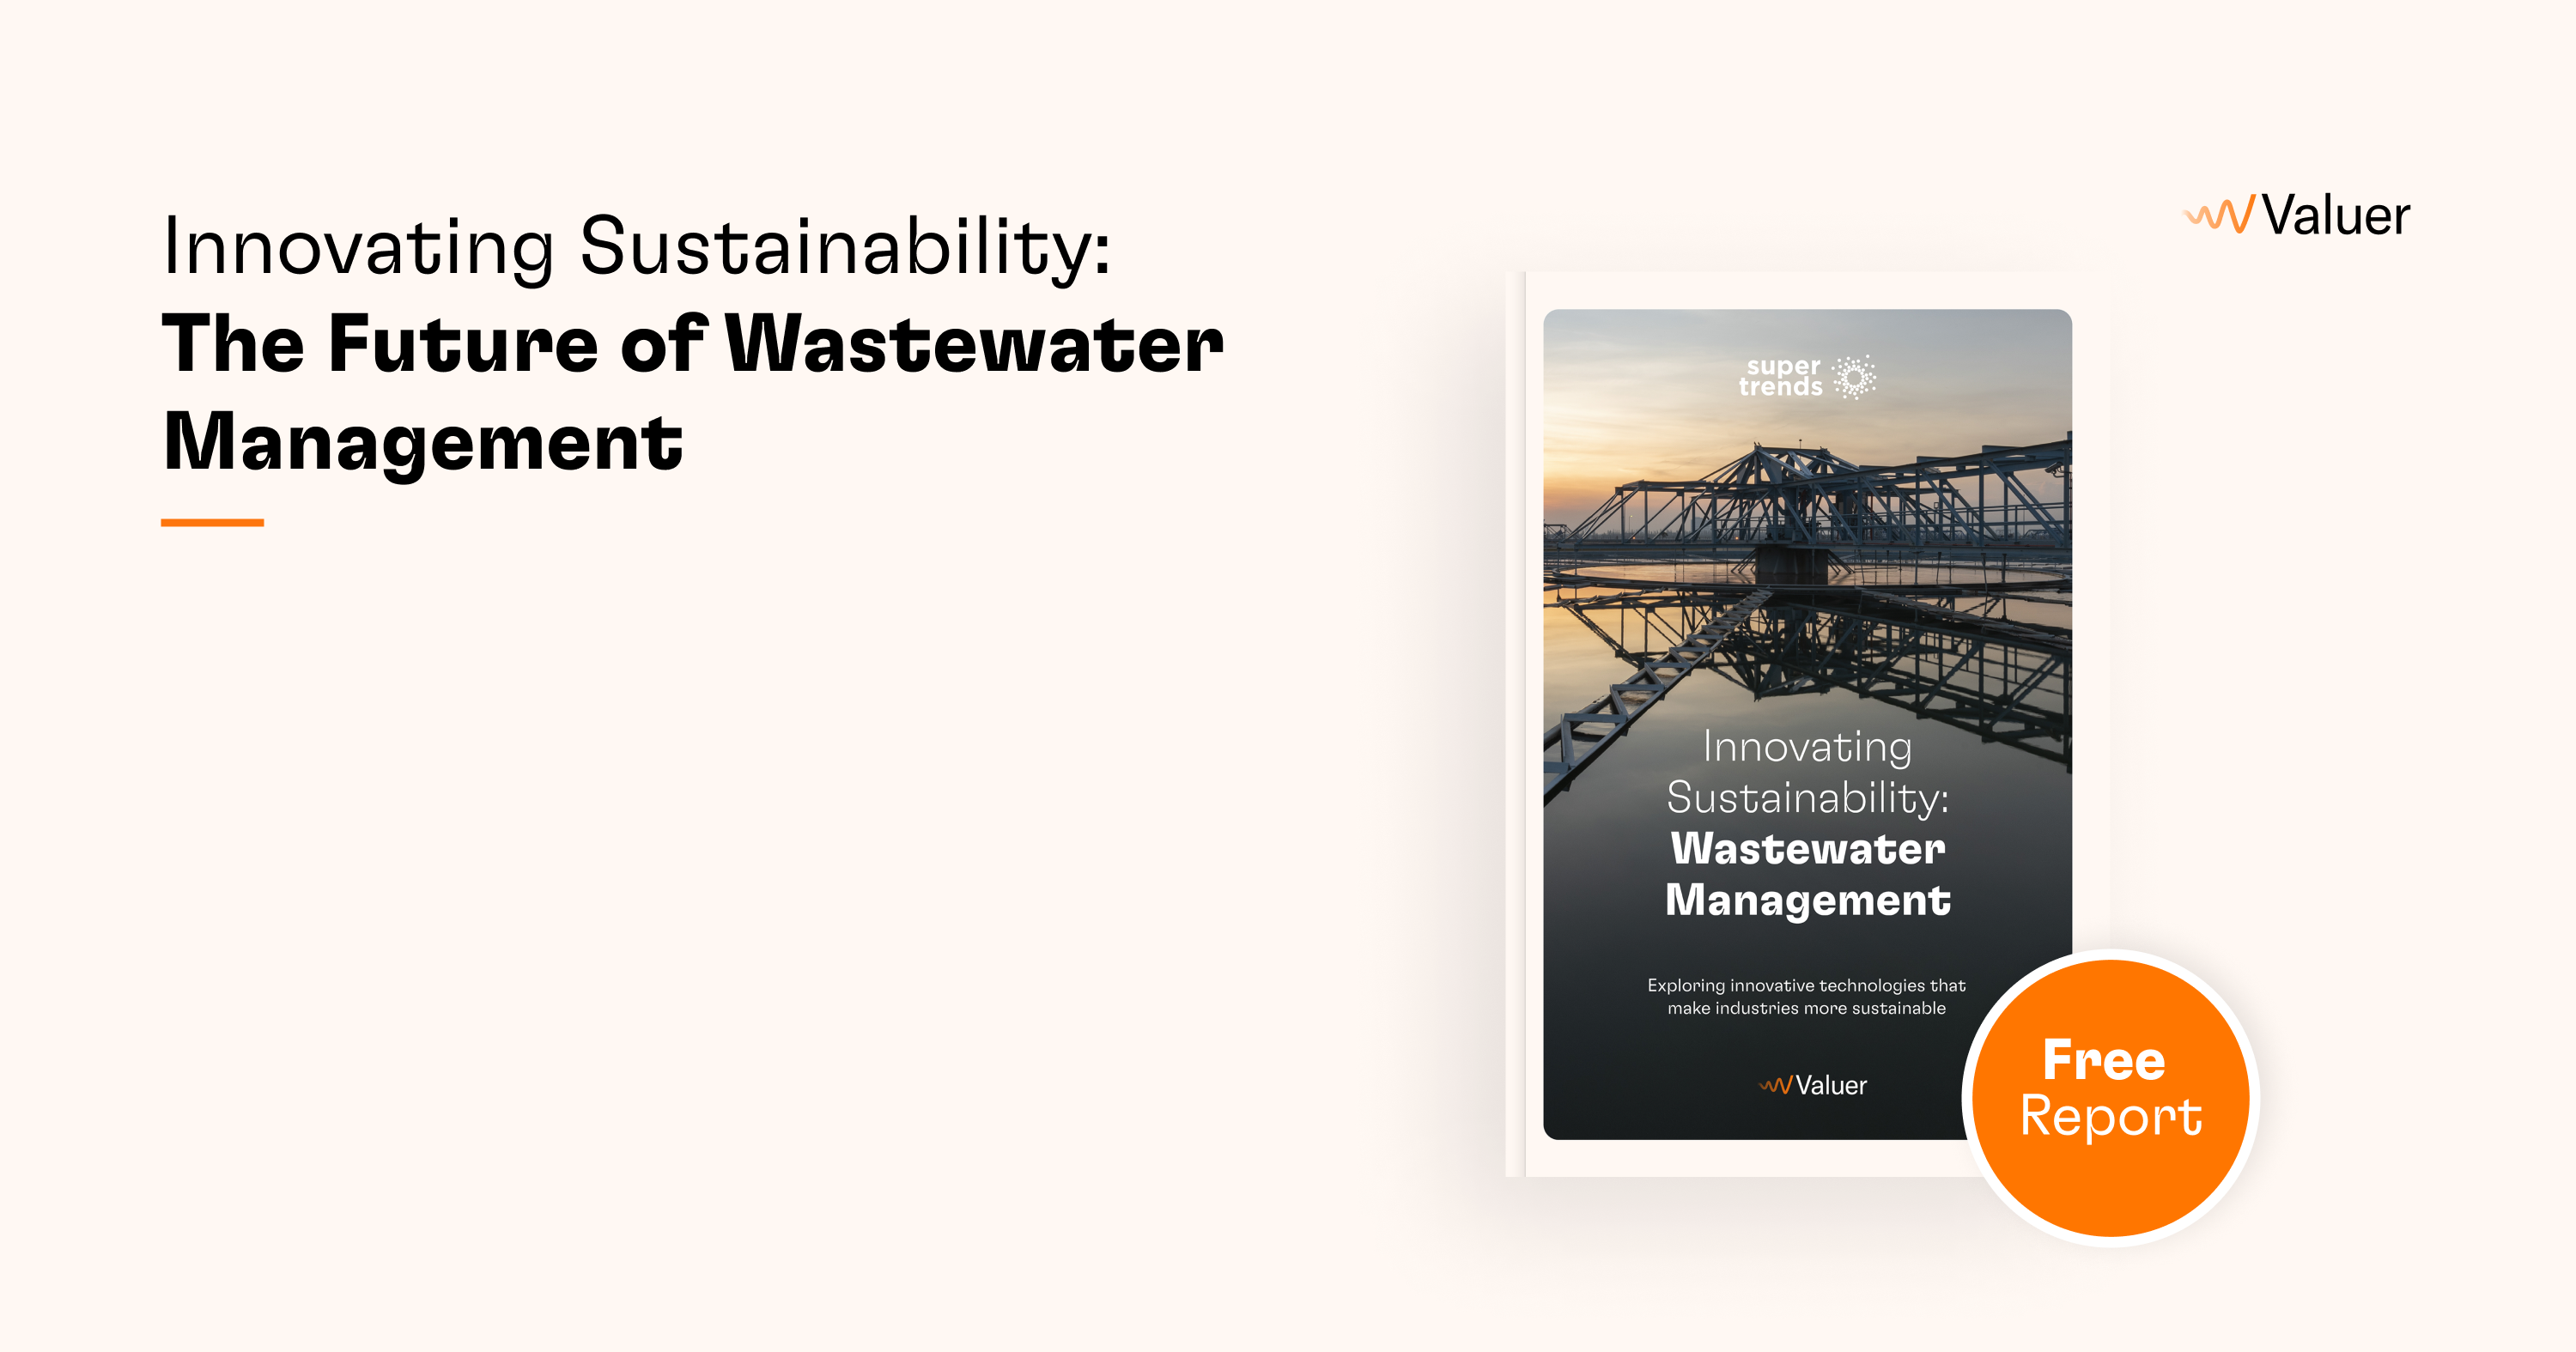 Innovating Sustainability: The Future of Wastewater Management (Free Report)